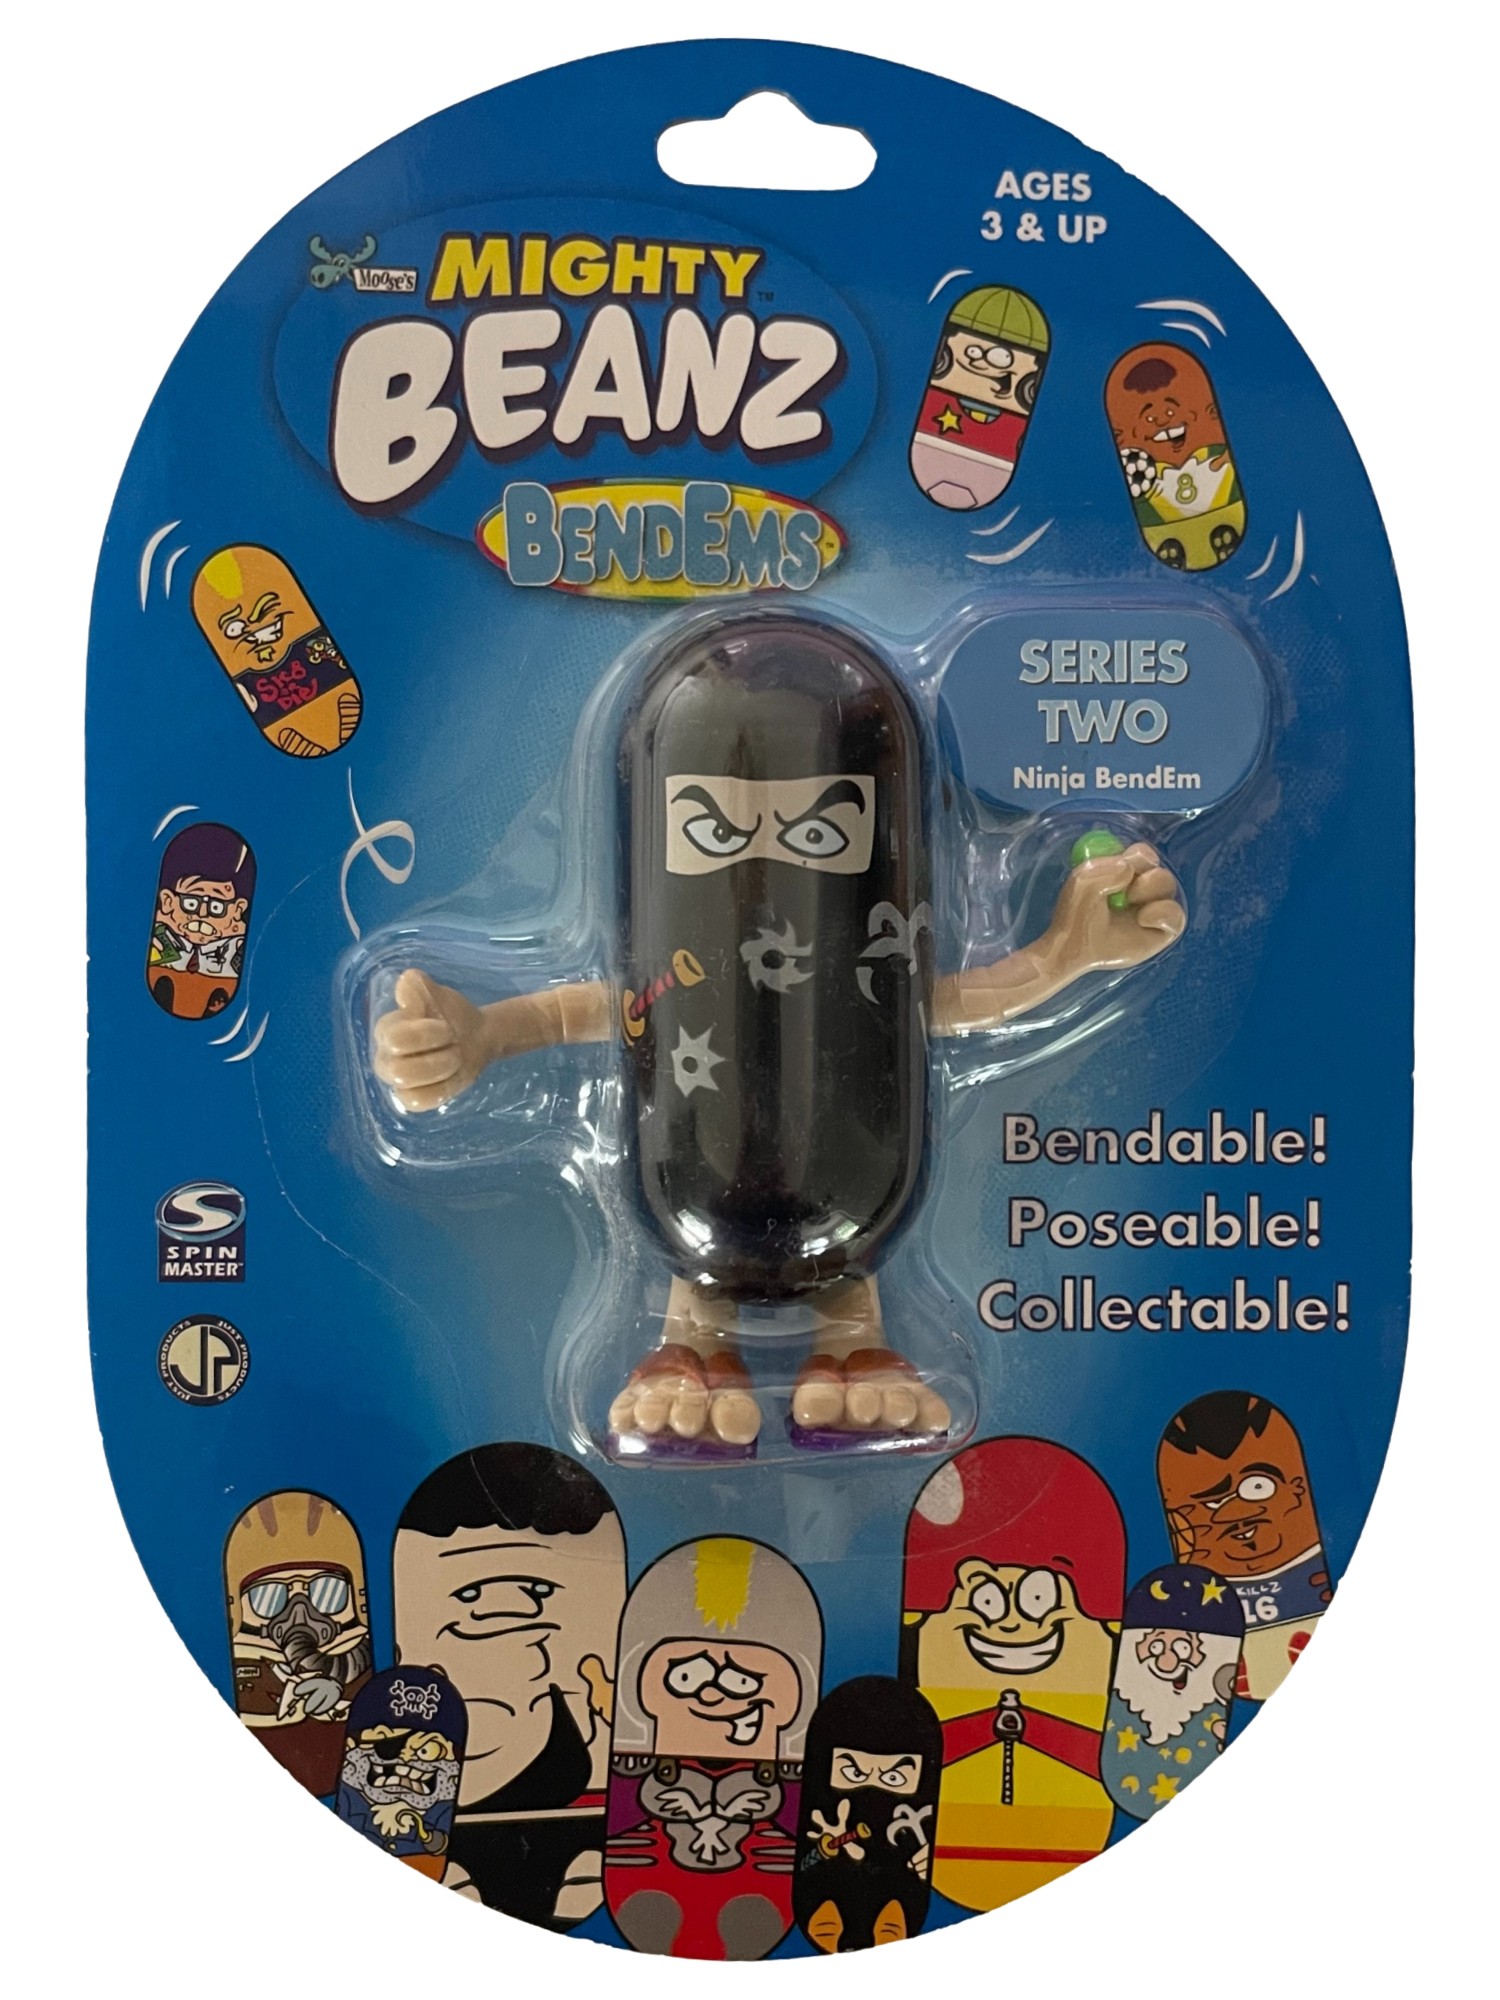 Mighty Beanz BendEms Collectible Ninja BendEm Beanz Series Two Blue Pk - image 1 of 2